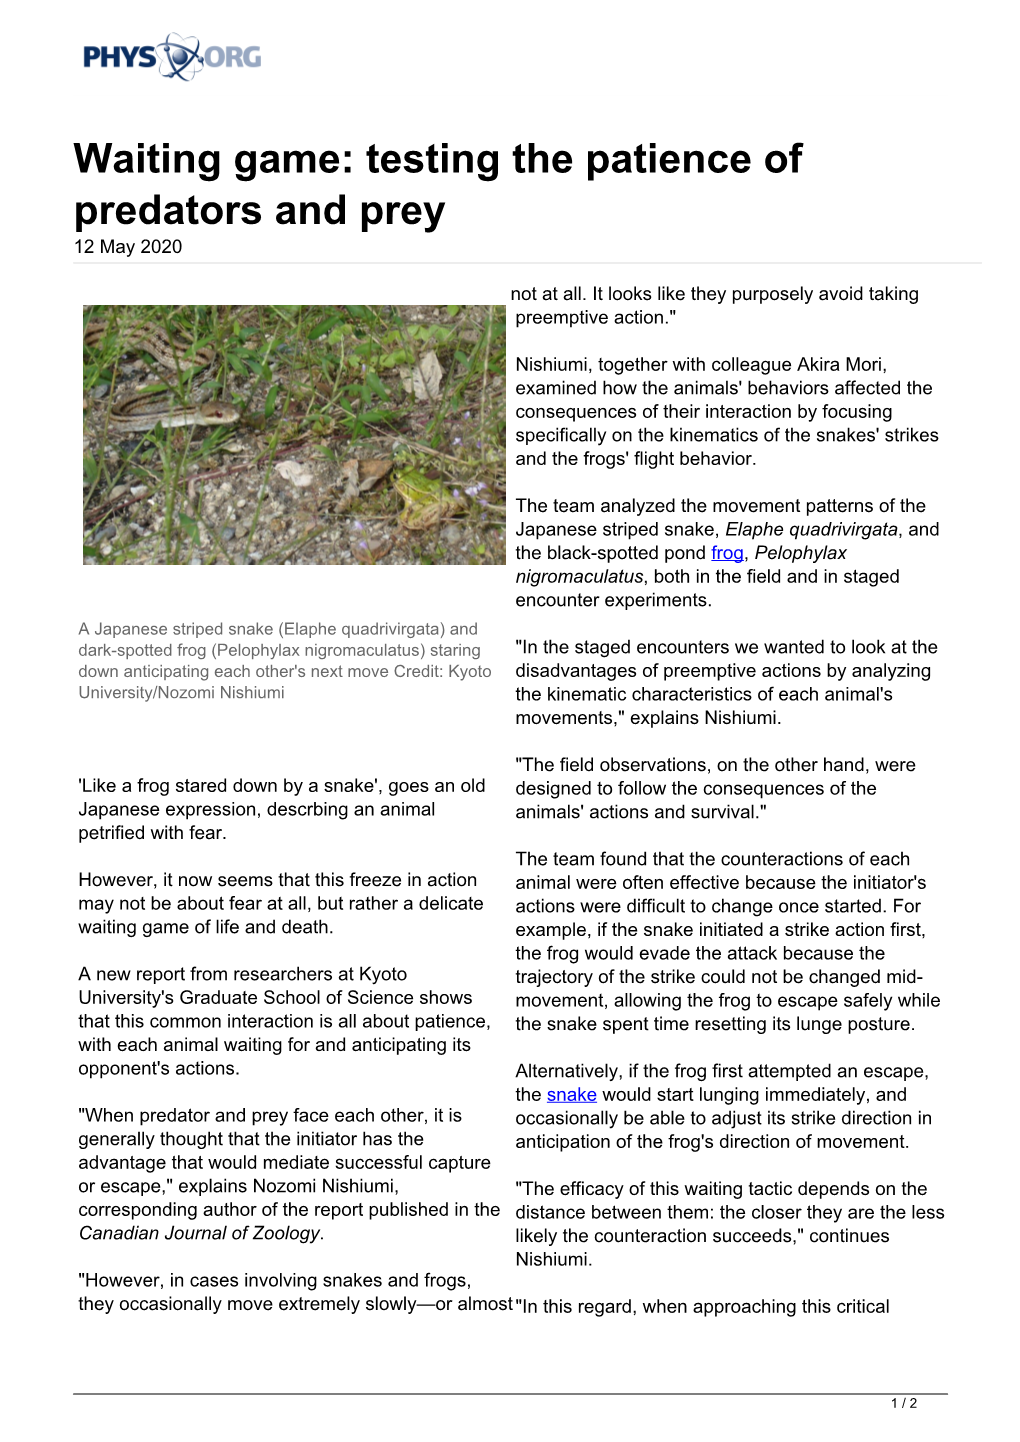 Waiting Game: Testing the Patience of Predators and Prey 12 May 2020